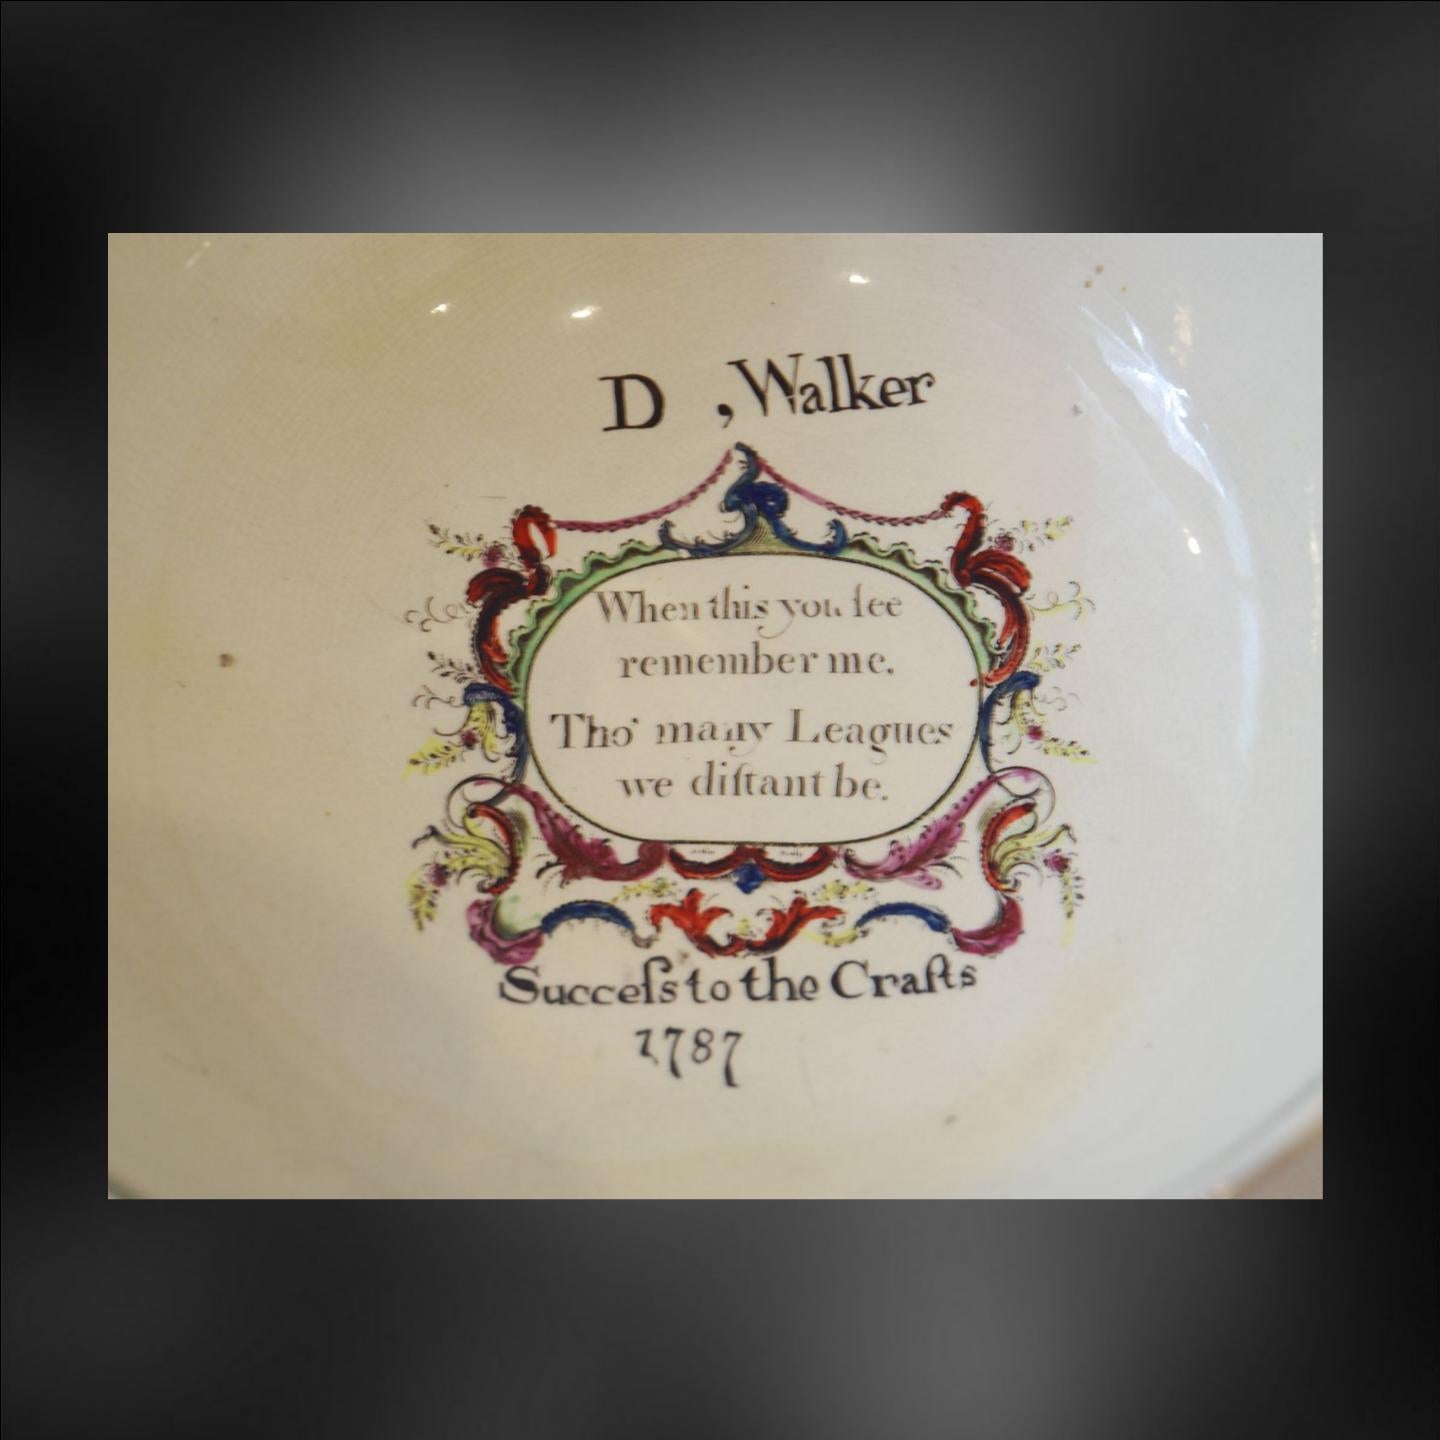 A documentary punch bowl, decorated with transfer prints and enameling, dated and inscribed for D. Walker. Unmarked, but this class of dated creamware with enameled prints belongs to Leeds.

